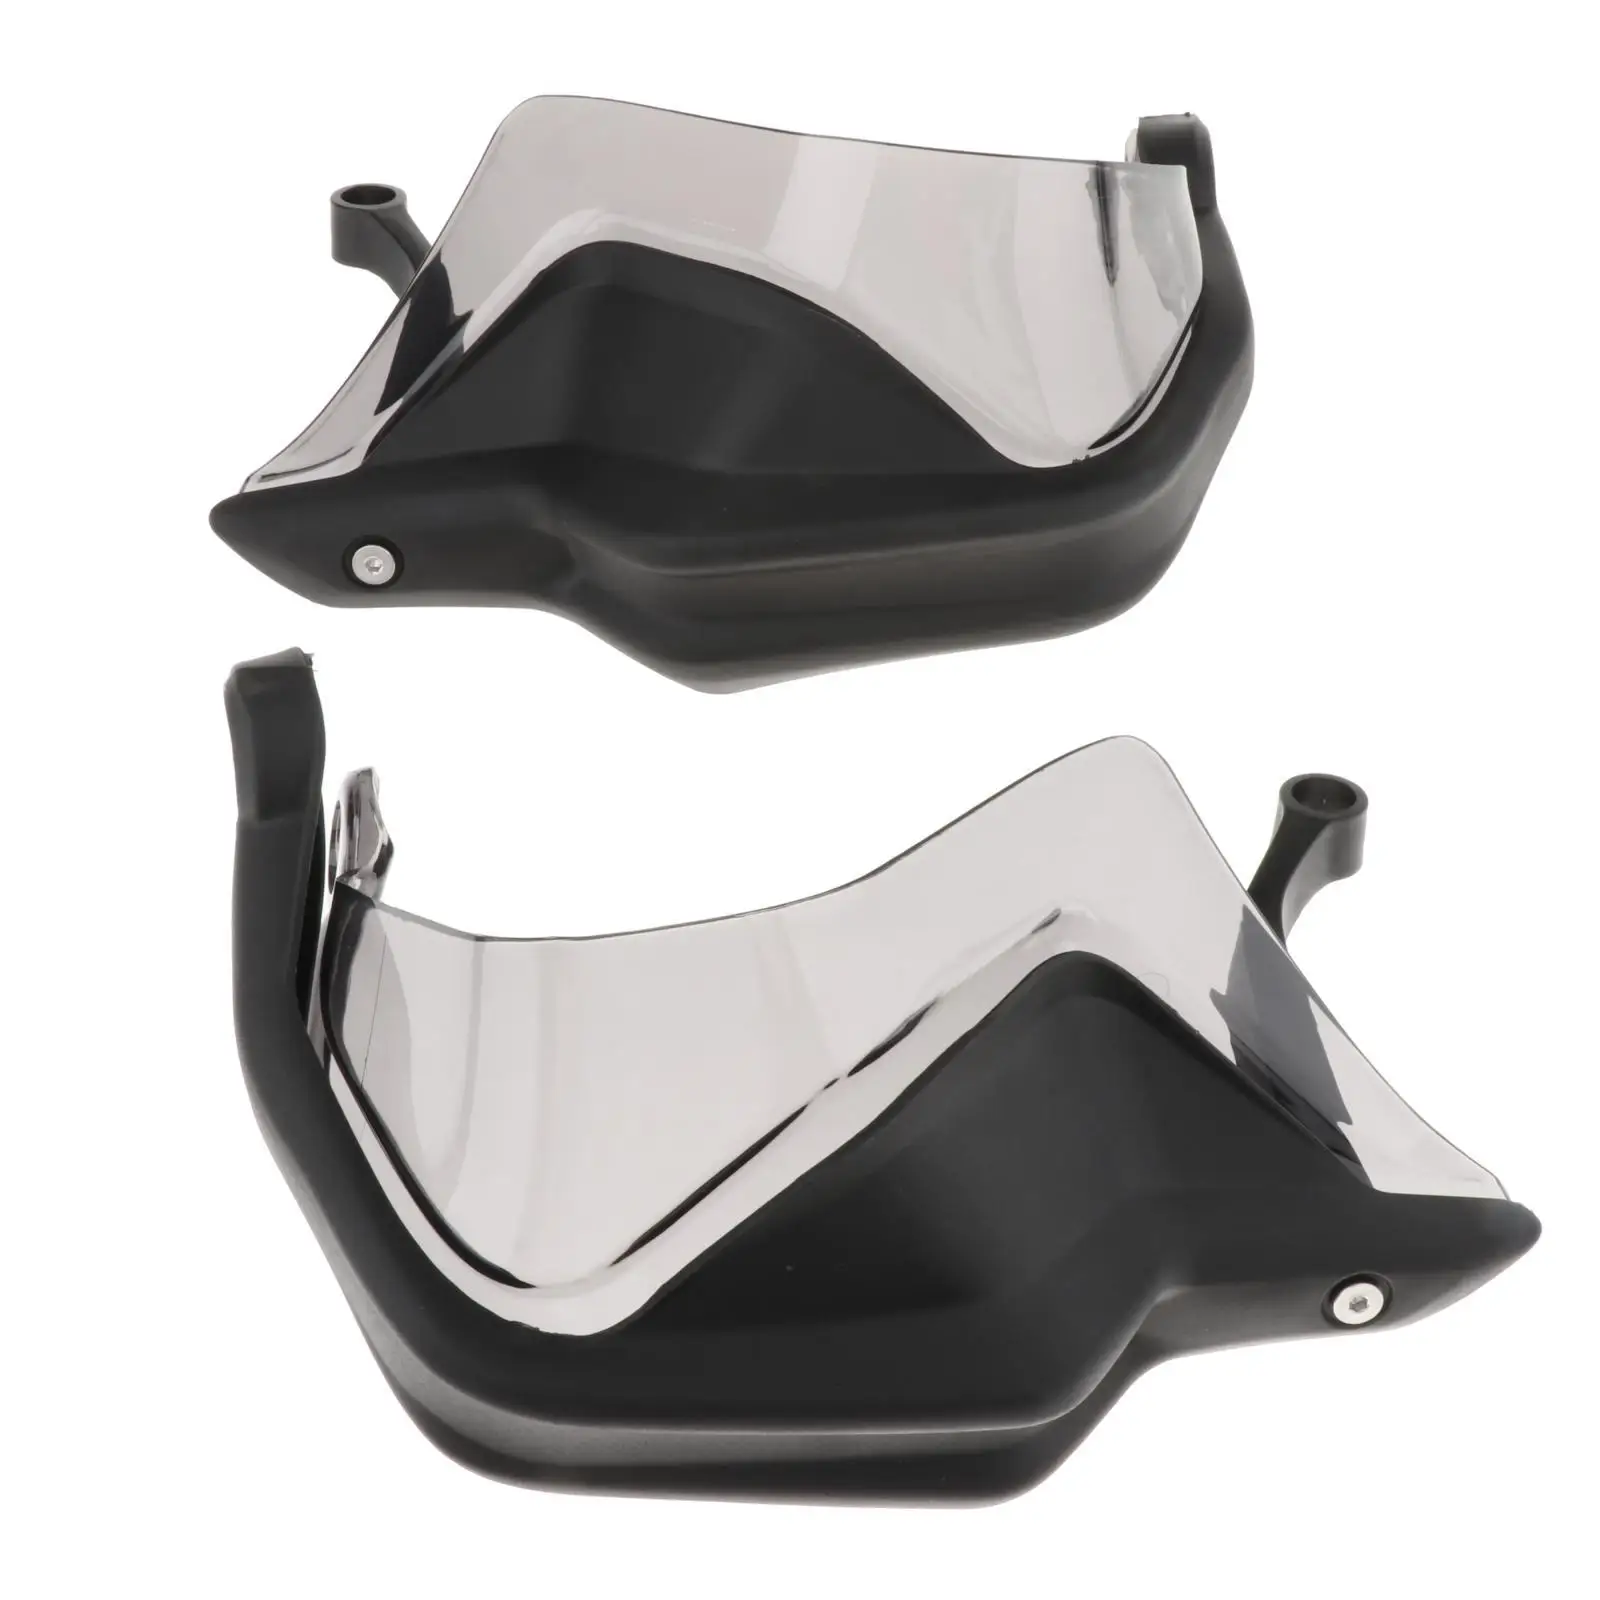 2x Motorcycle Hand Protector Durable 10.63x10.63x5.91